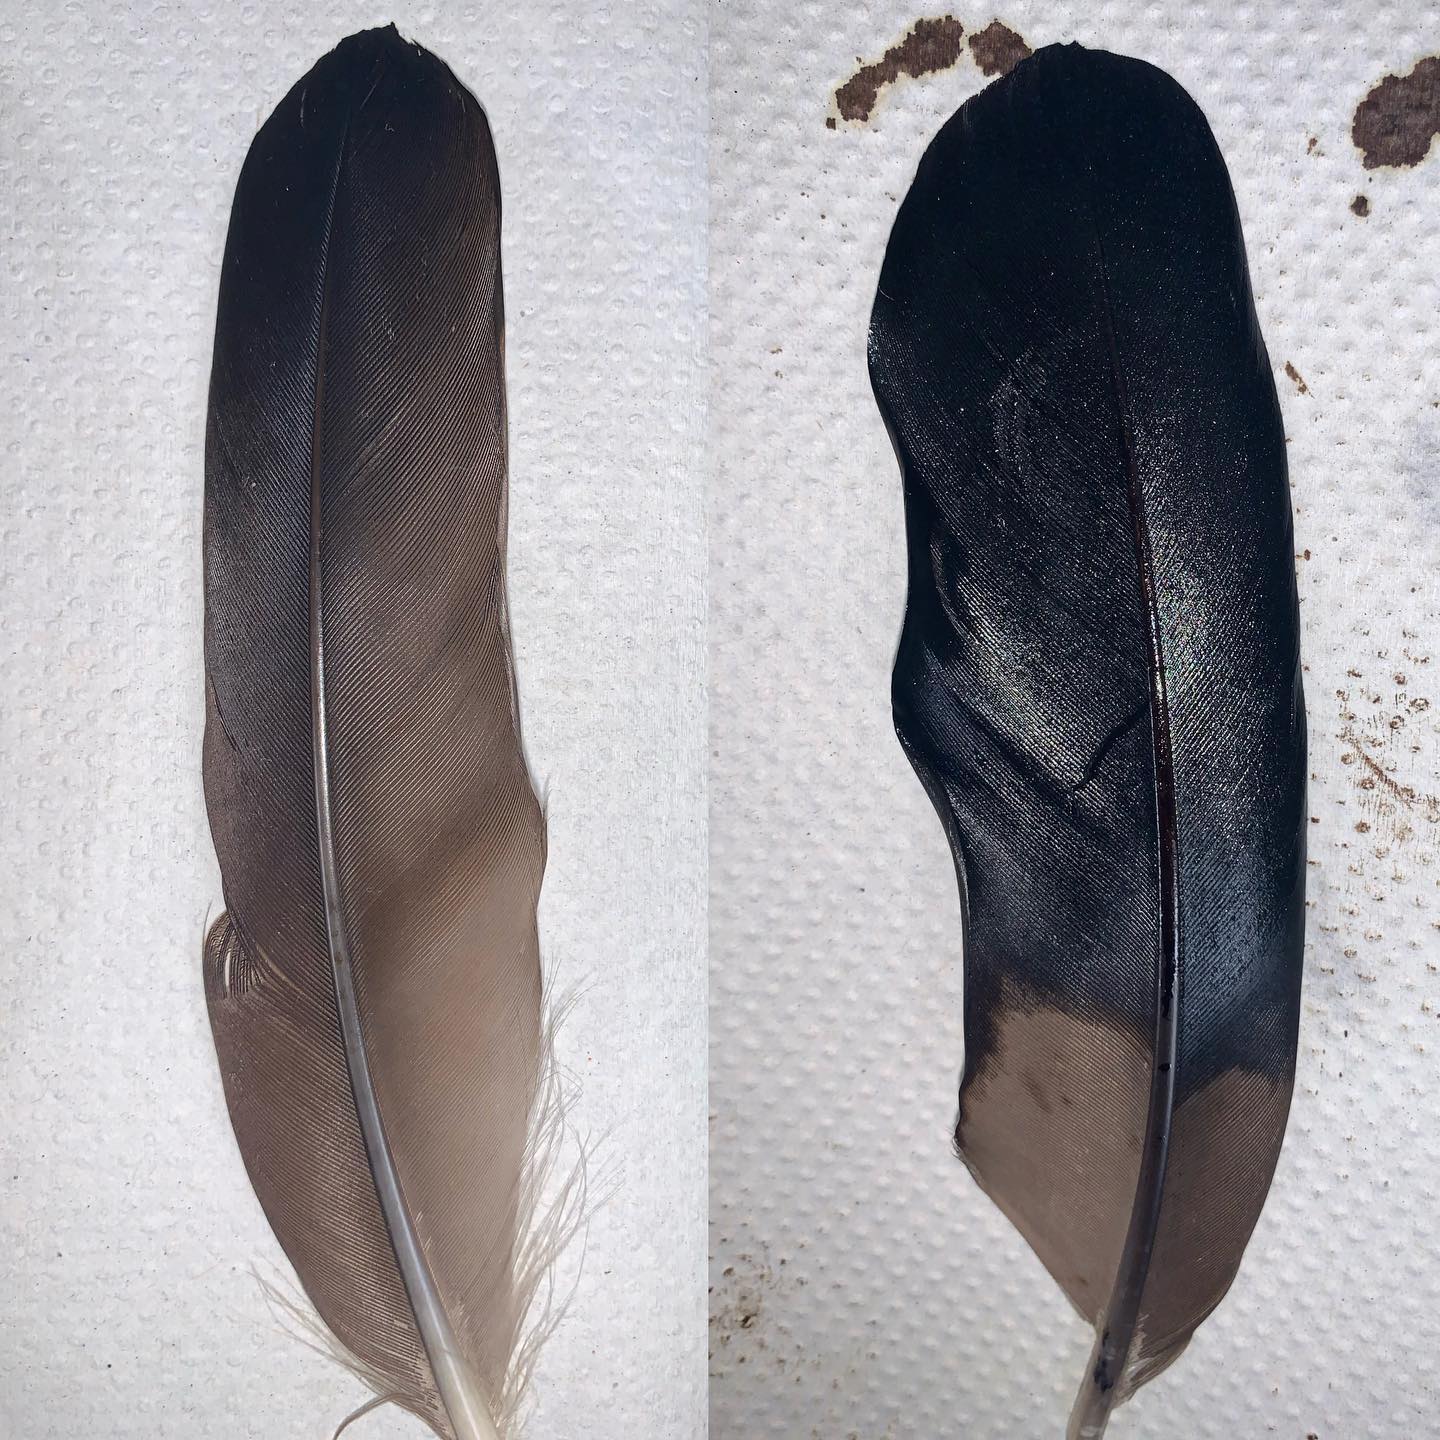 On the left we have a feather cleaned using our solvent and on the right we have a feather cleaned using a 7% Dawn dish detergent solution. ~80-90% oil removed Vs. ~35% oil removed